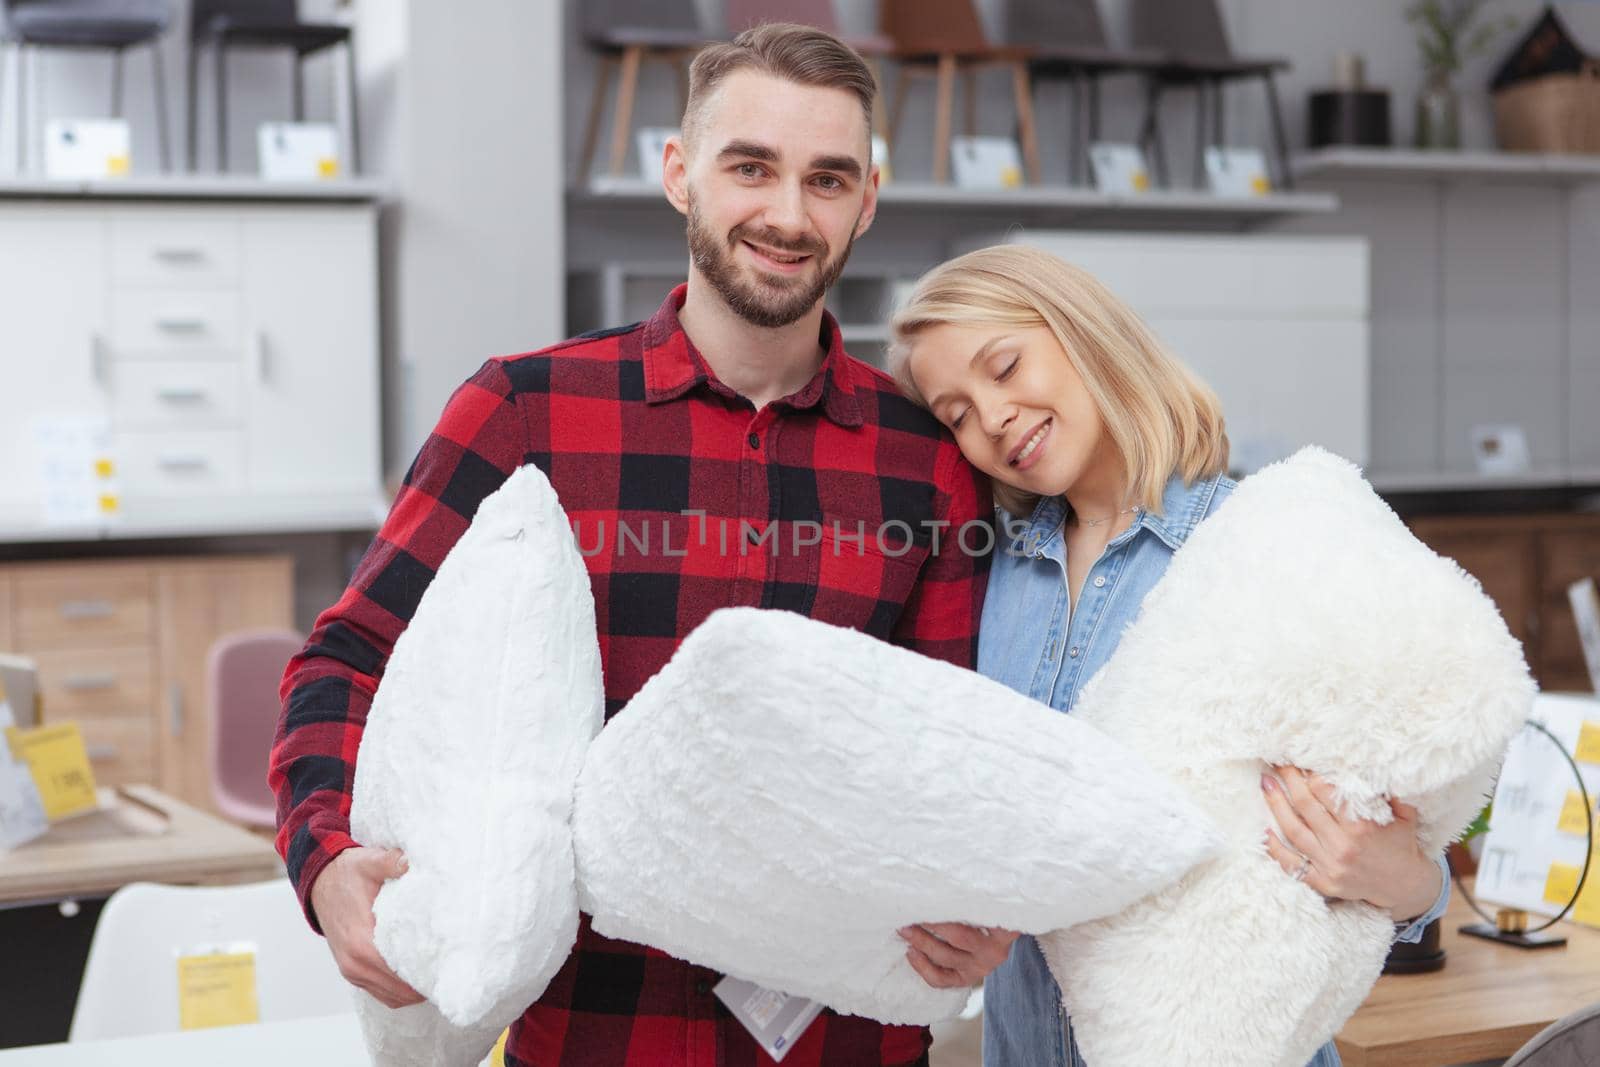 Happy young ouple buying new pillows at furnishings store. Charming young husband and wife enjoying shopping for their new apartment